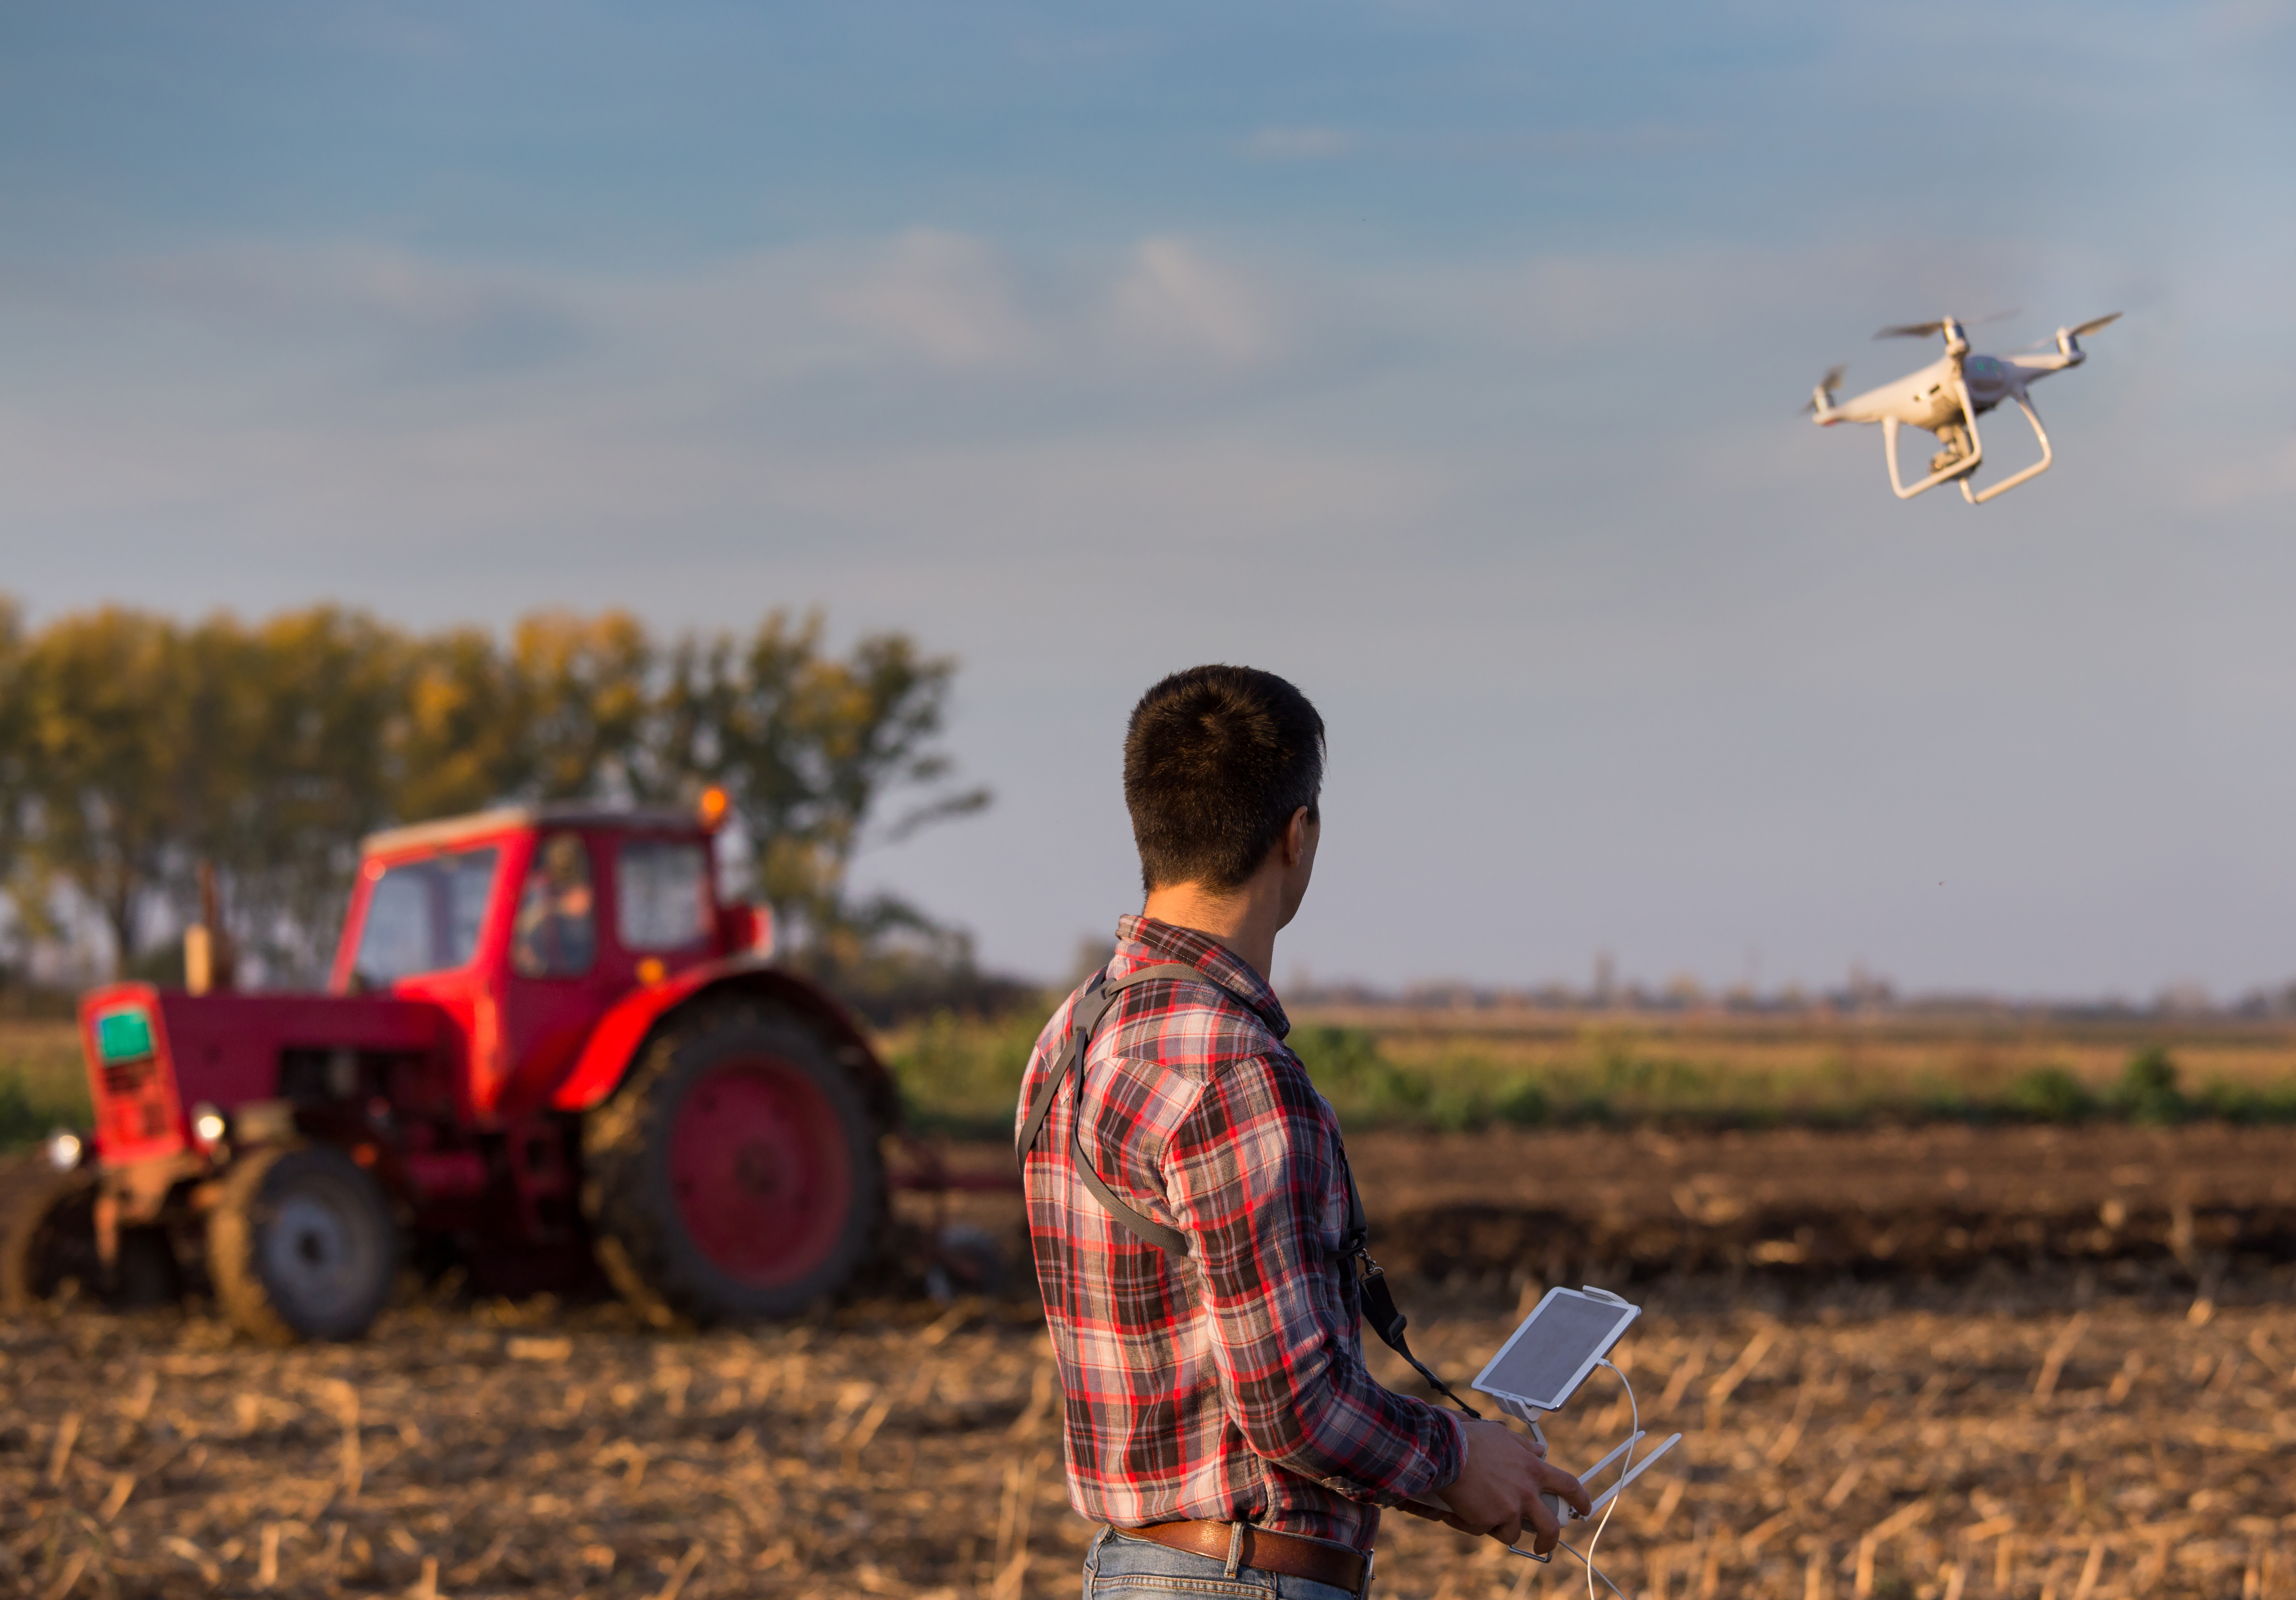 A person operates a drone over a tractor in a field 